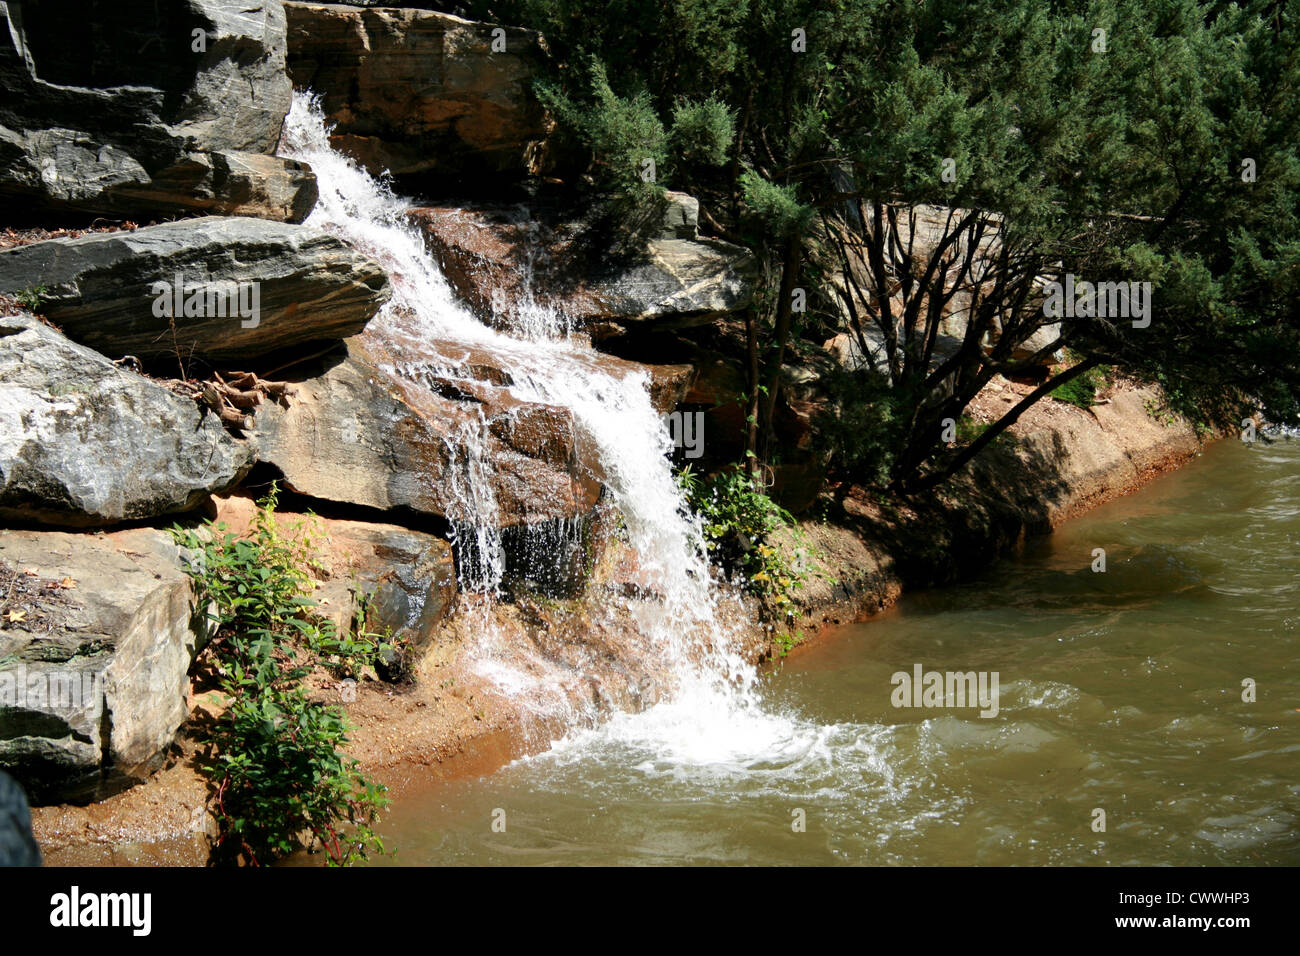 waterfall mountain stream river picture of waterfalls Stock Photo